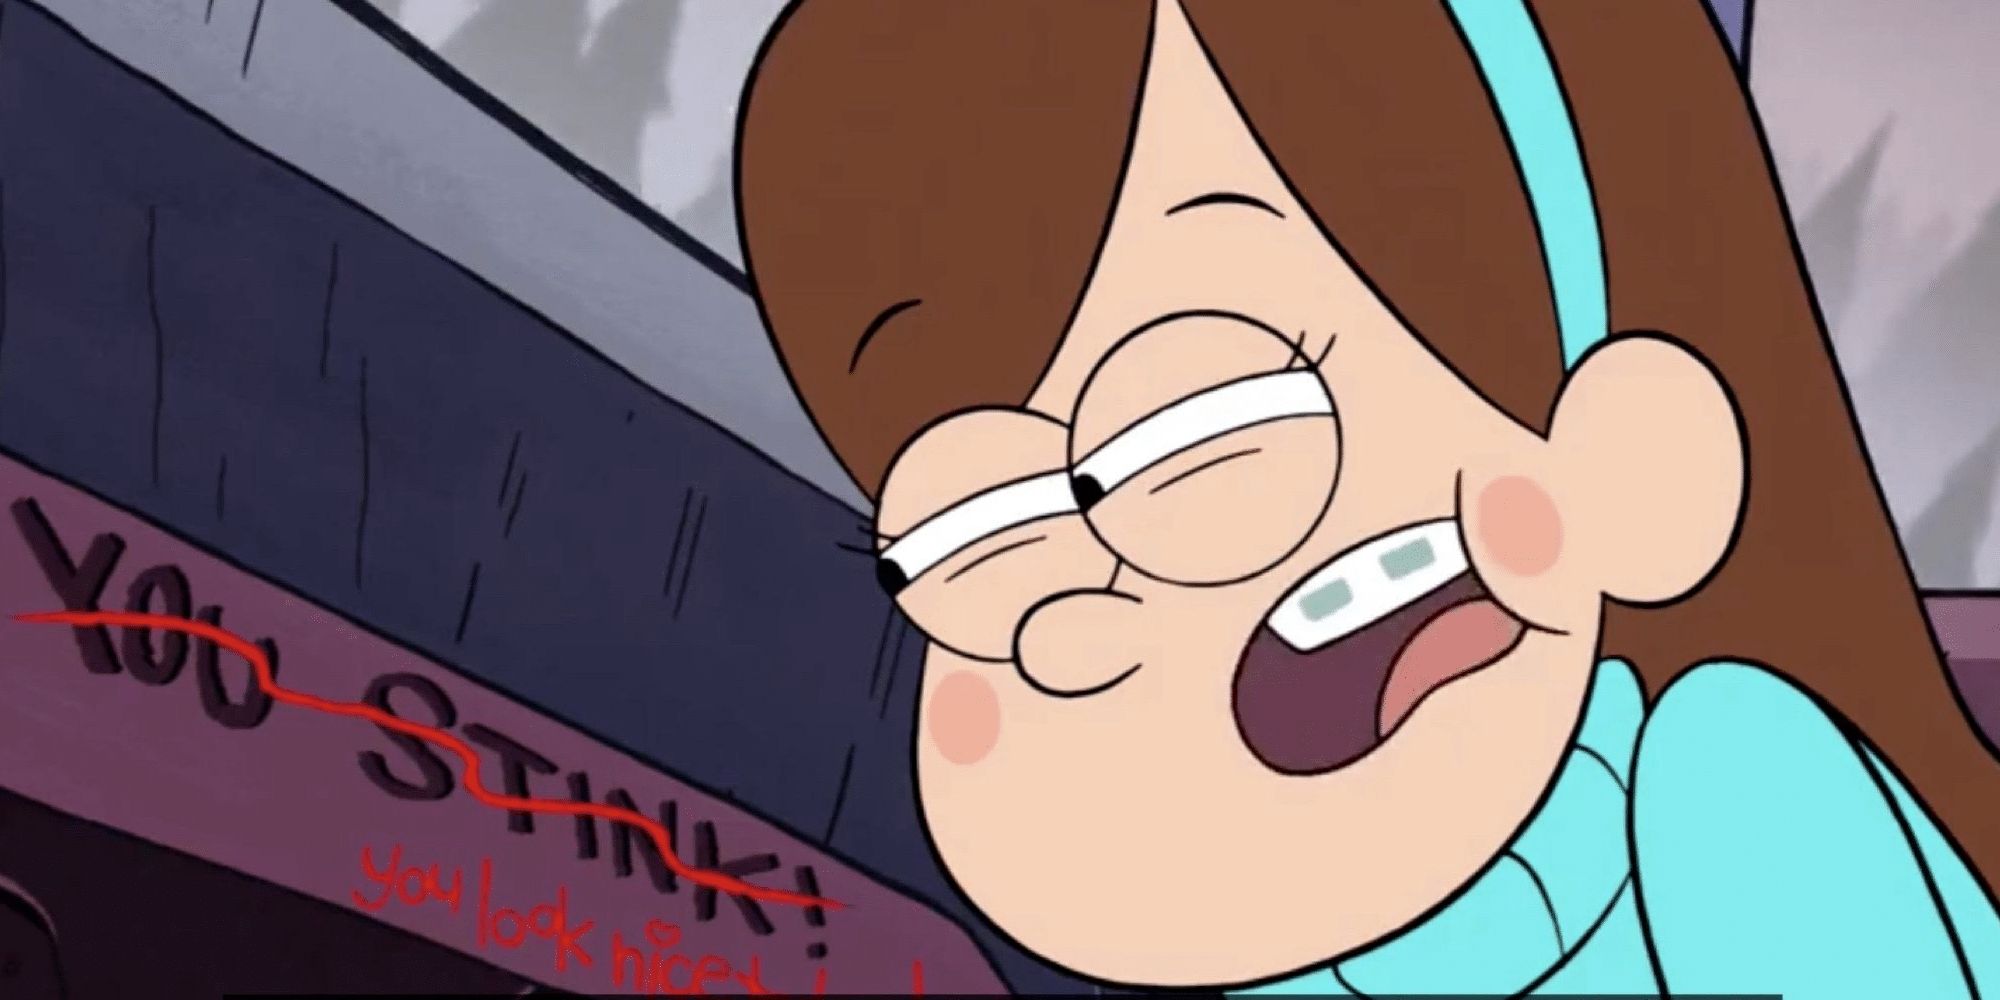 Every Main Gravity Falls Character, Ranked By Courage